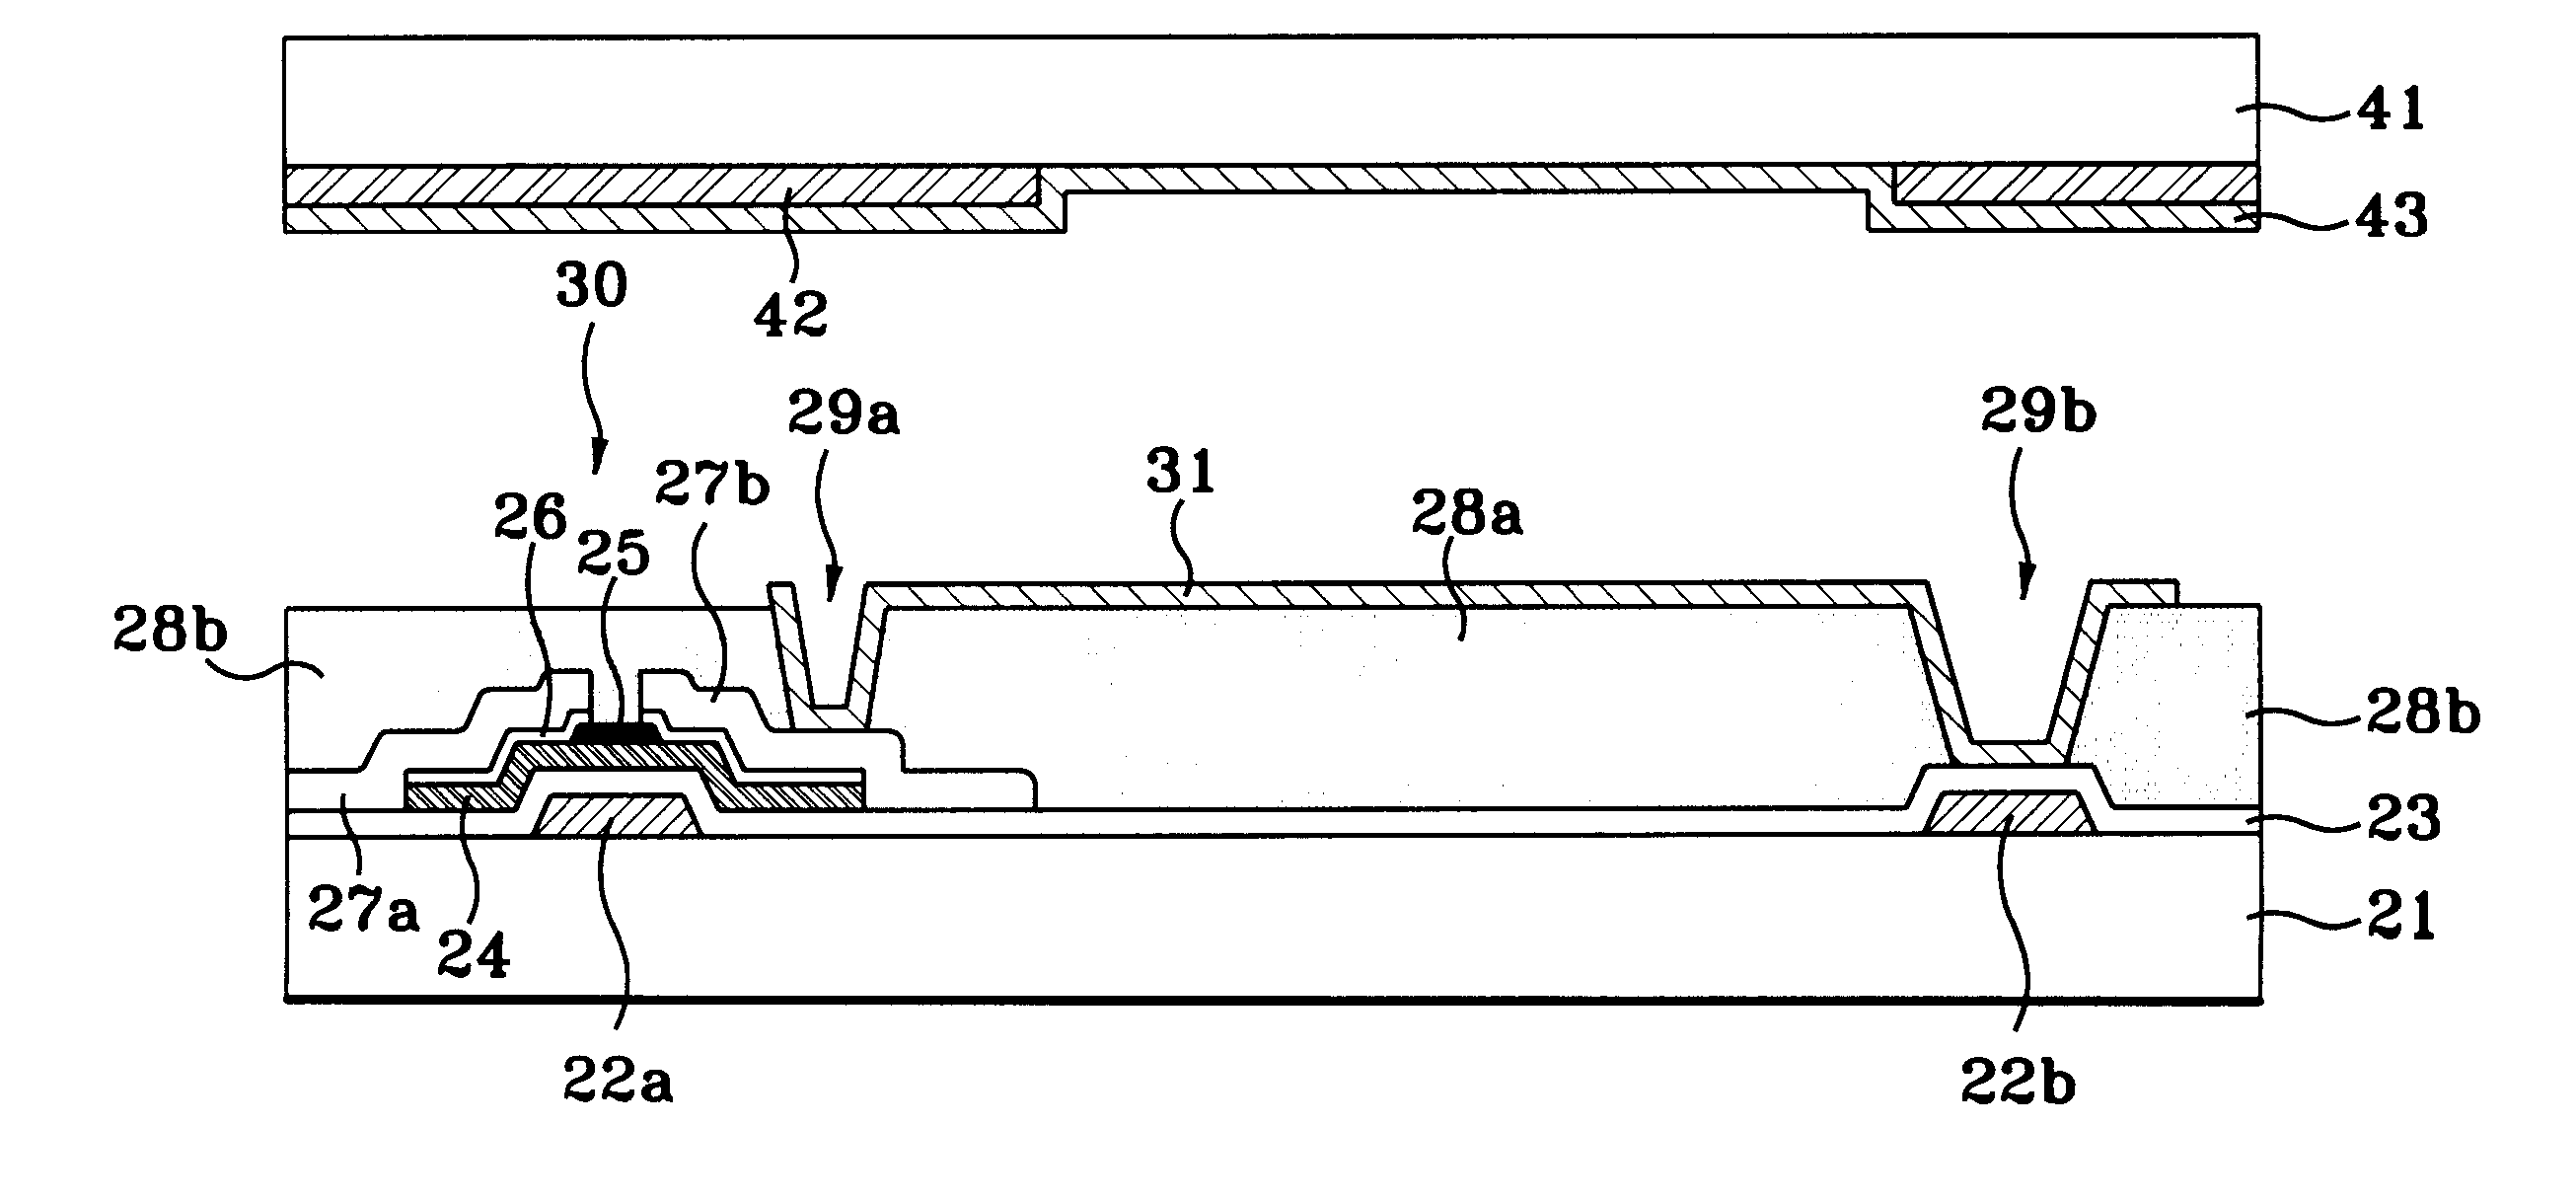 Thin film transistor liquid crystal display and method for manufacturing the same